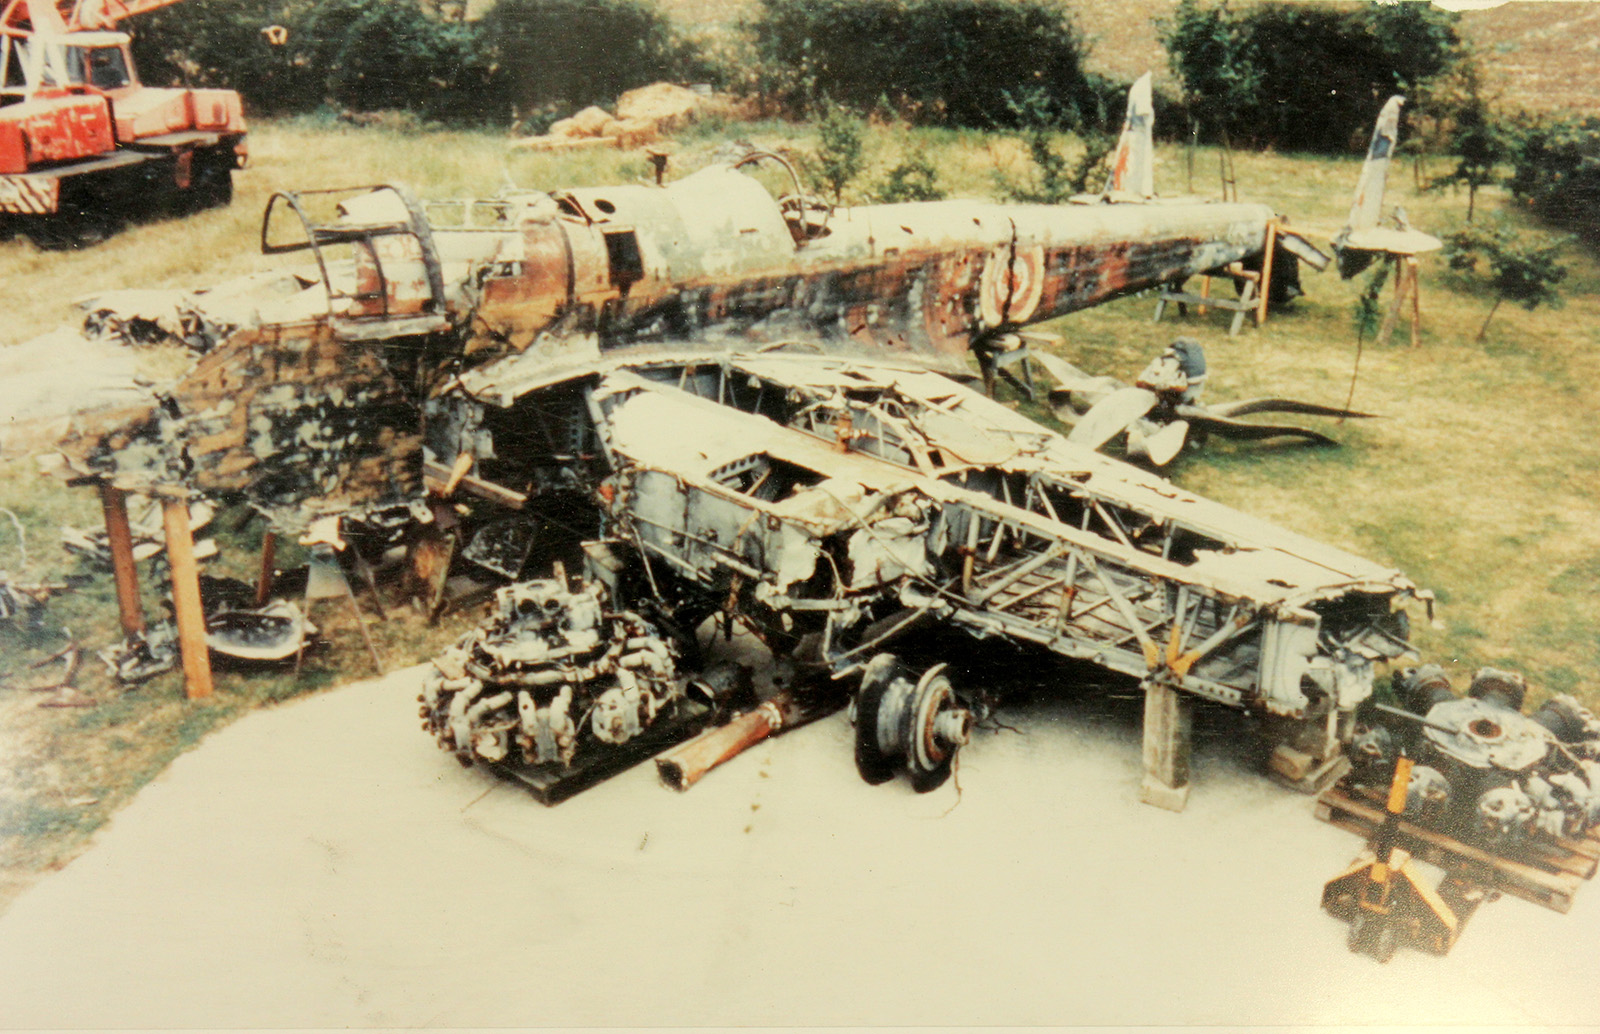 P1344 as she looked when laid out by Jeet Mahal for inspection by the RAF Museum in 1992. (photo by Peter R Arnold via RAF Museum)